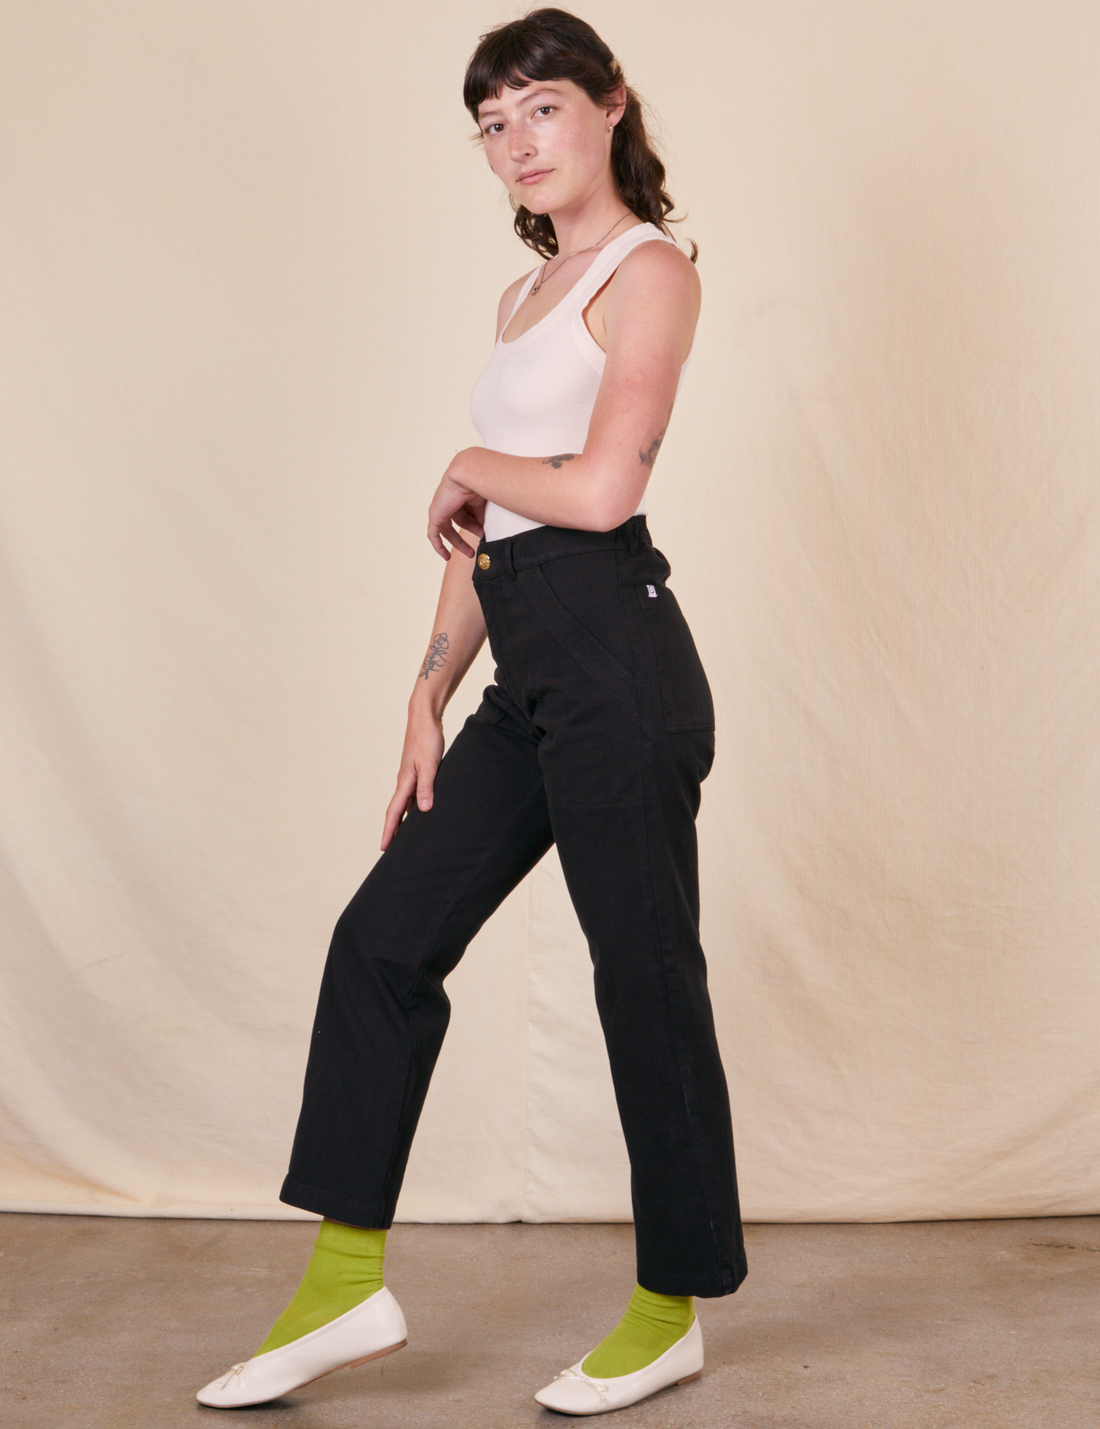 Work Pants in Basic Black side view on Alex